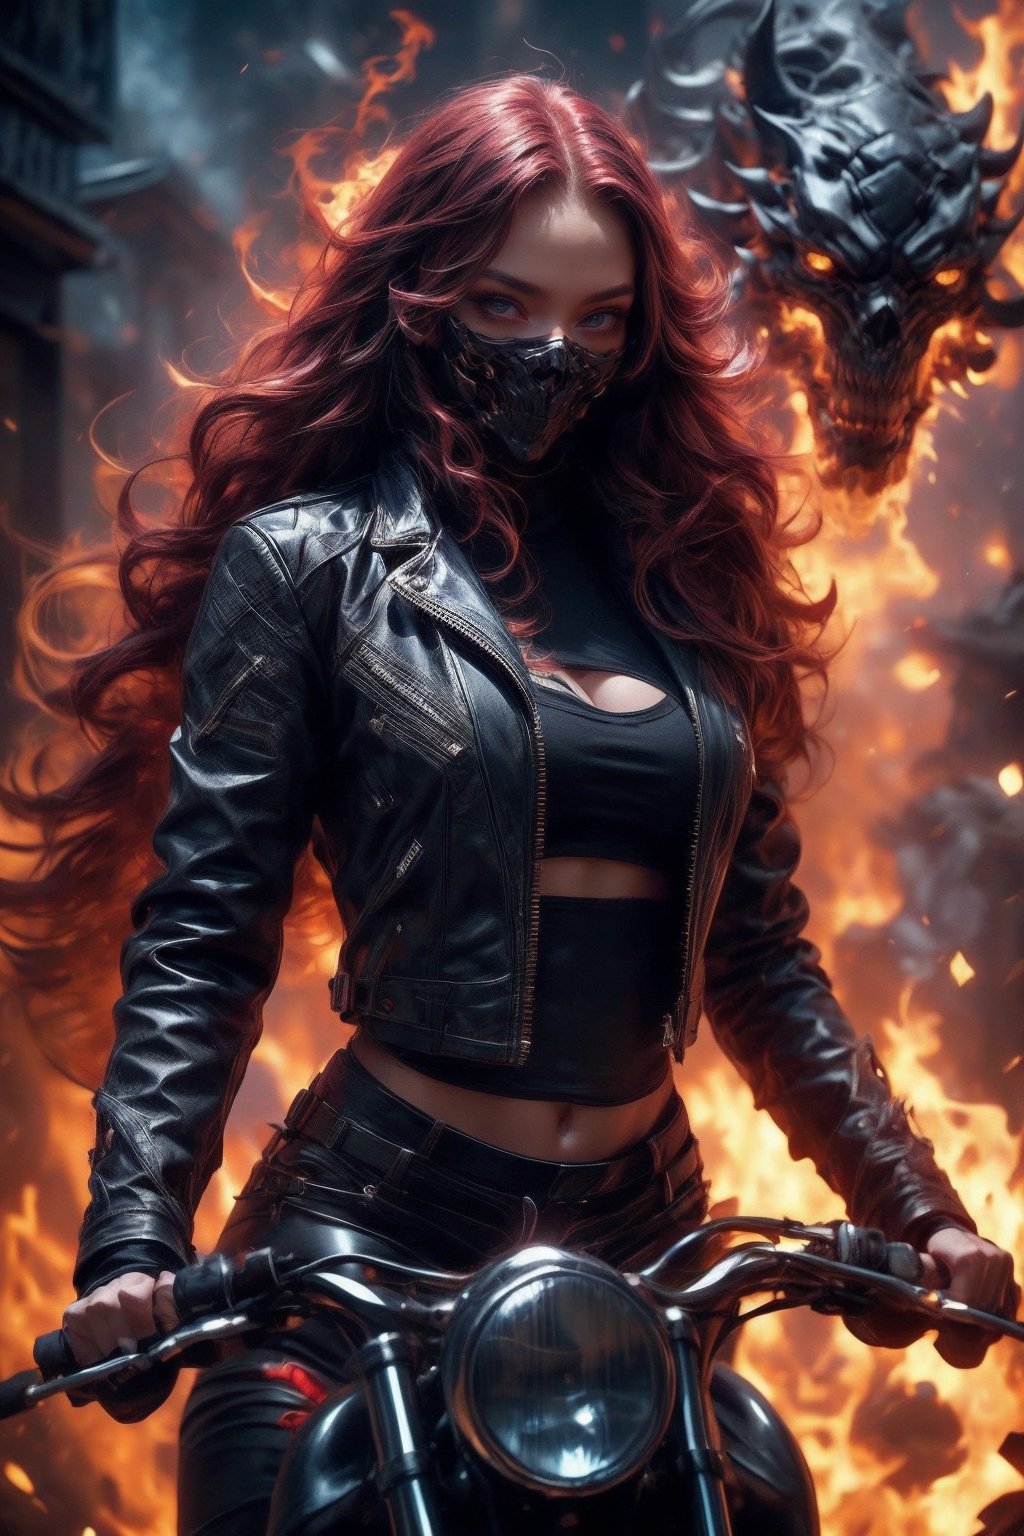 ((Generate hyper realistic image of  captivating scene featuring a stunning 22 years old girl, on a motorcycle)) with long fiery hair,  flowing in wind, donning a black leather shorts and a Black jacket over is naked body,fire eyes, photography style , Extremely Realistic,  ,photo r3al,photo of perfecteyes eyes,realistic,leather,ghostrider, hair of fire, eyes of fire,RED FIRE GREEN FIRE BLUE FIRE PURPLE FIR,Ghost mask , Firehair